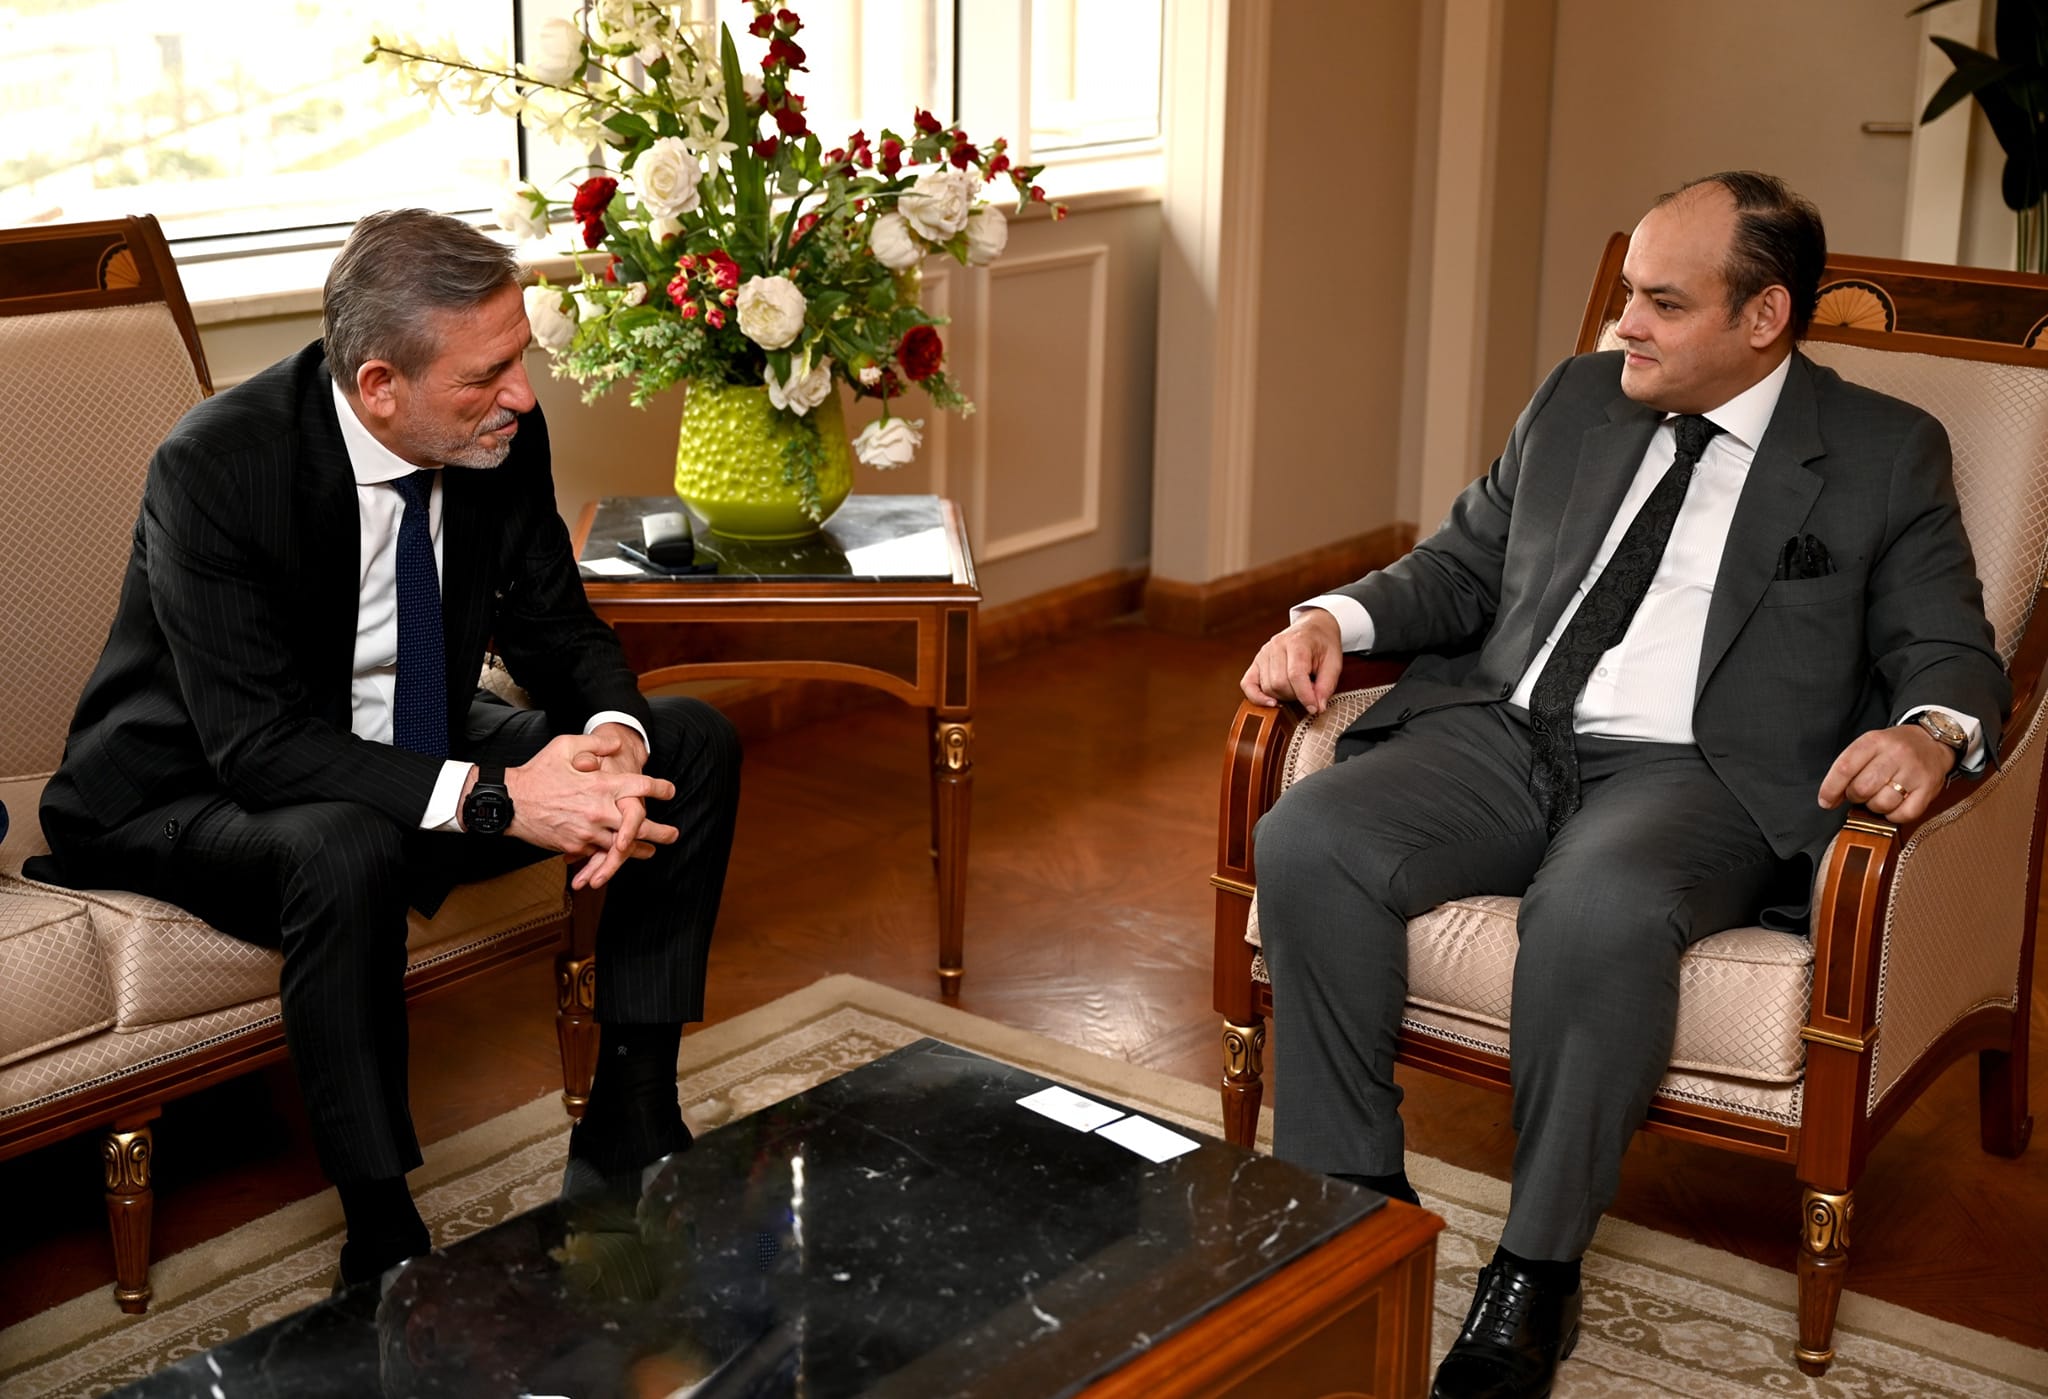 Egypt's Trade Minister, Ahmed Samir (right), and Turkey’s Chairman of the Board of Directors of Bursa Chamber of Commerce and Industry, İbrahim Burkay